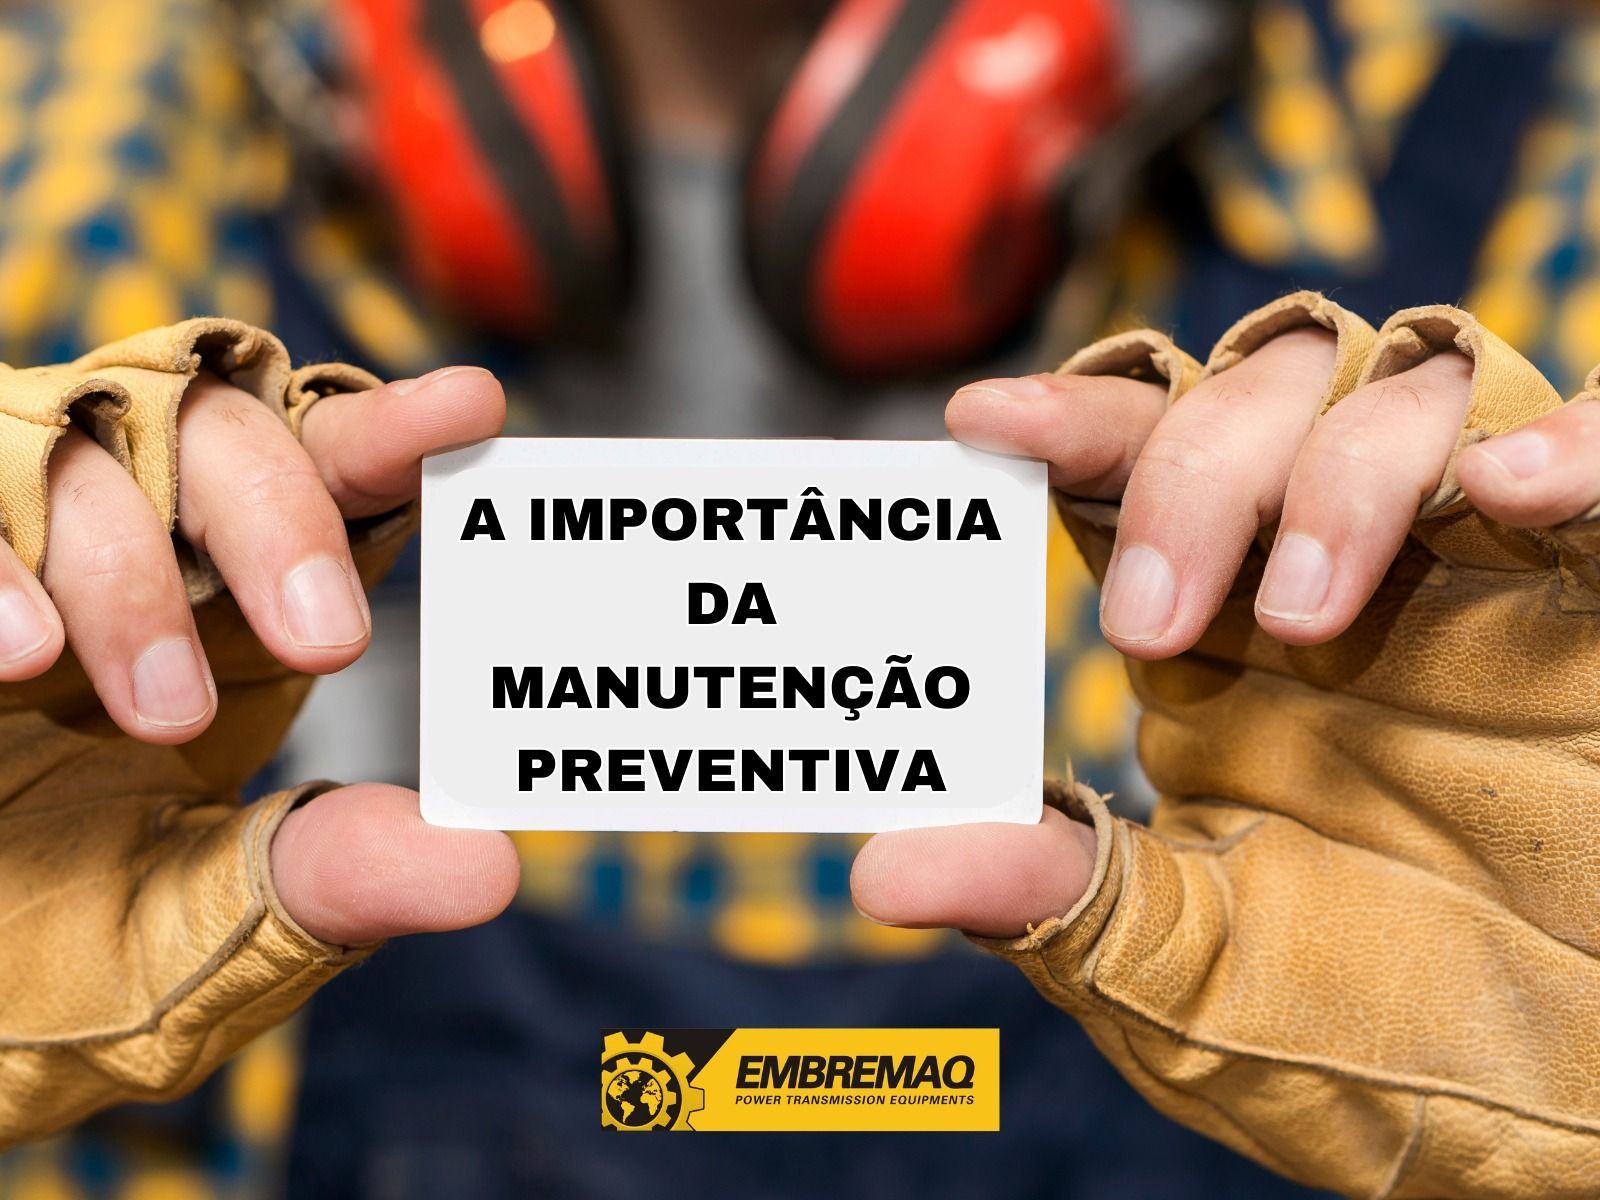 Mechanic holding a sign about the importance of preventive maintenance